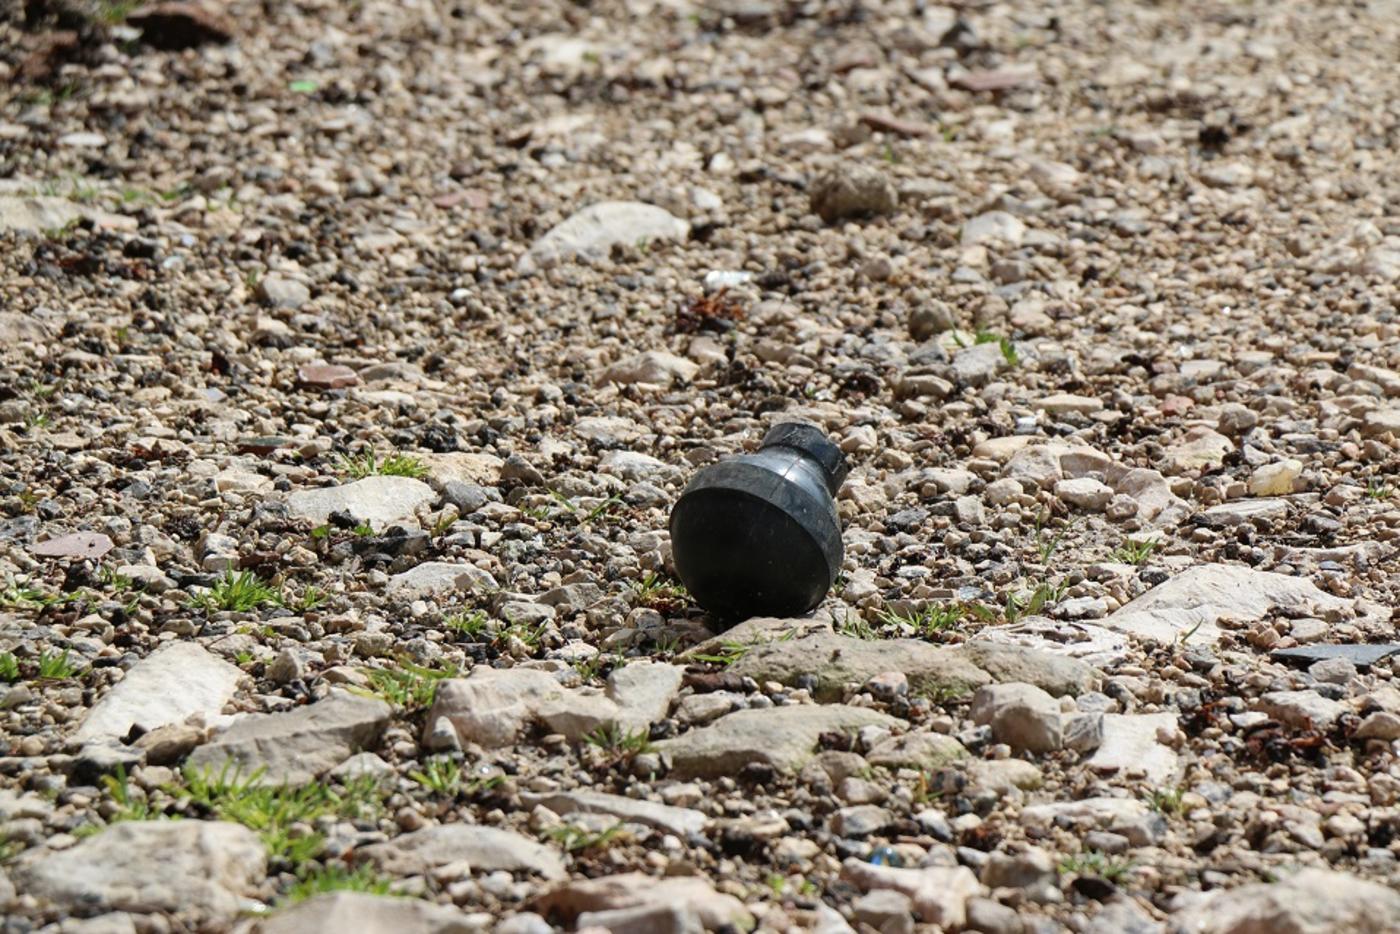 Remnants of a sound bombs set off by the soldiers in front of Abu Srour's home (MEE/Akram al-Waara)